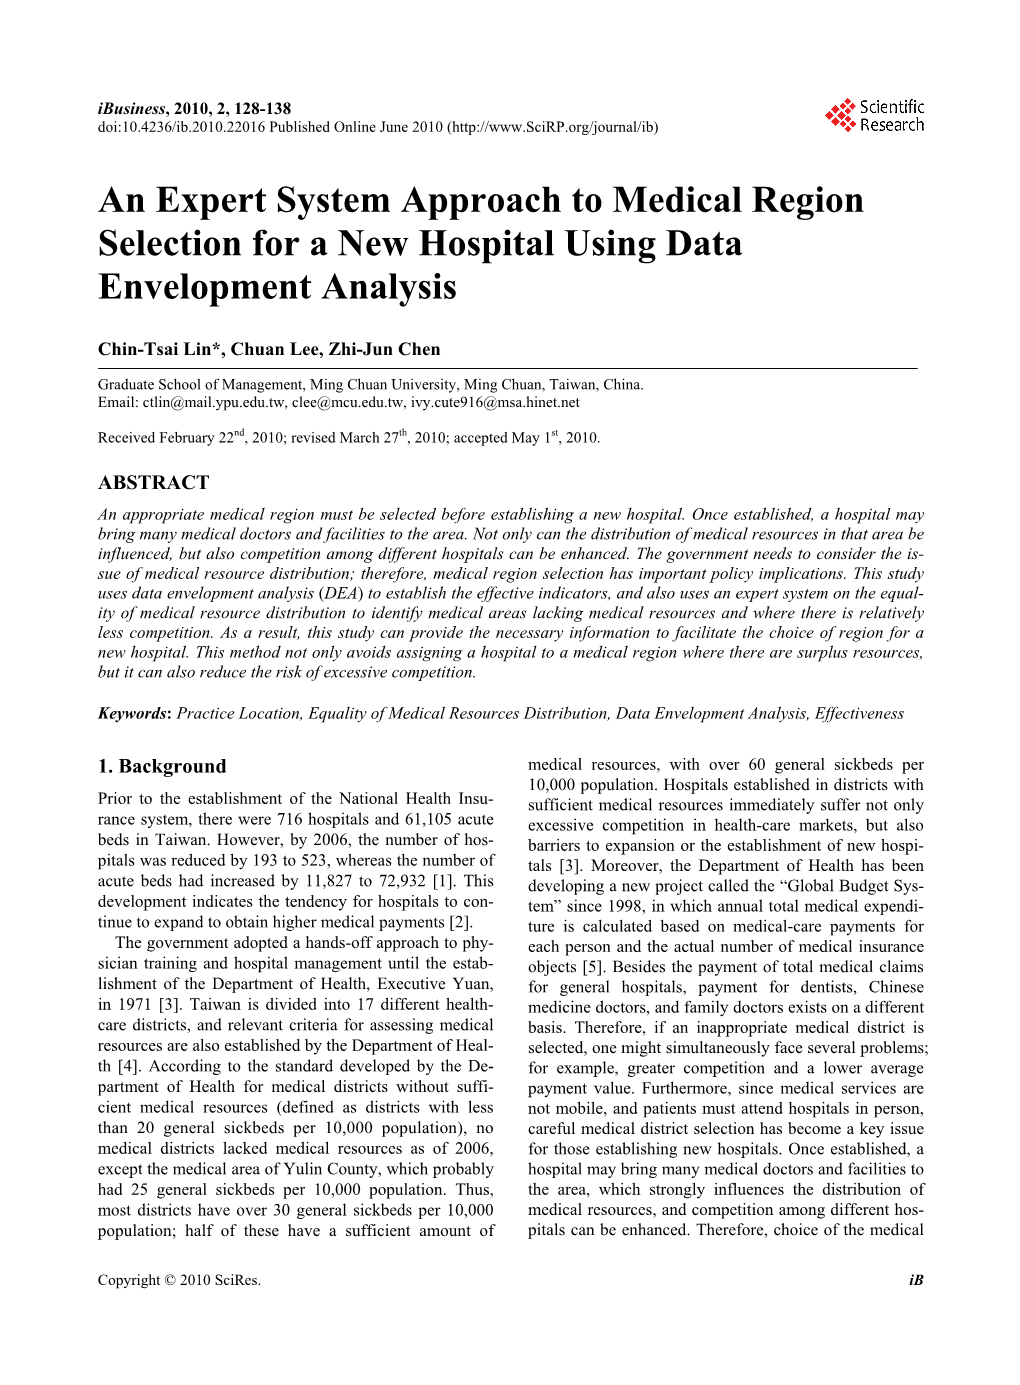 An Expert System Approach to Medical Region Selection for a New Hospital Using Data Envelopment Analysis